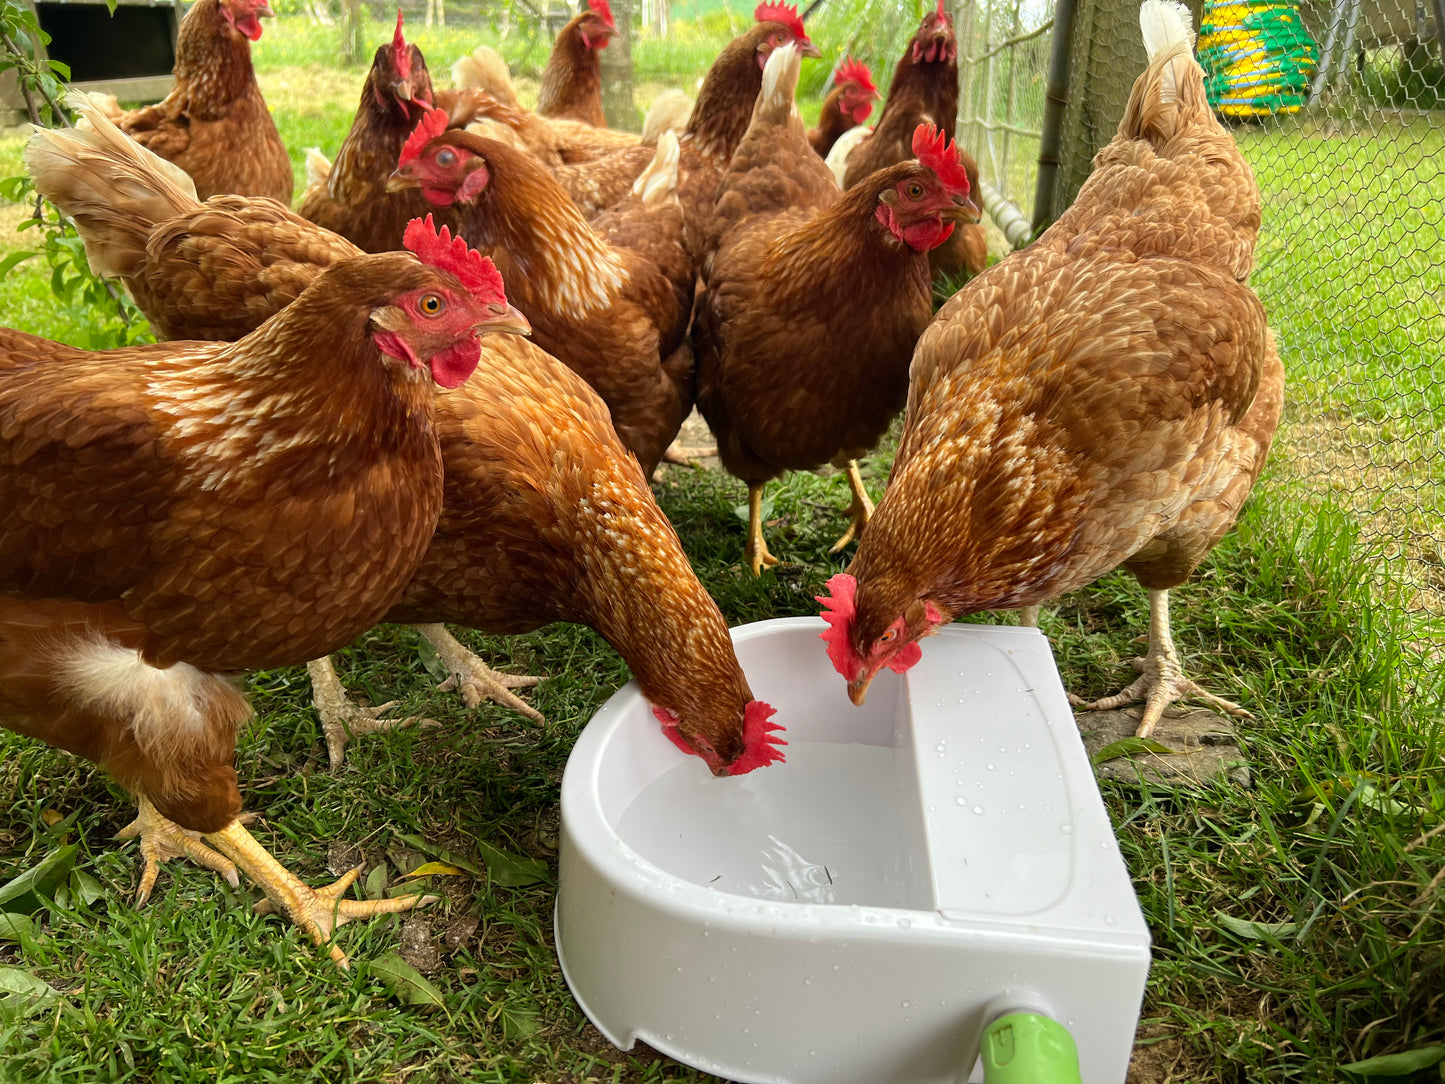 Automatic Outdoor Water Trough 1.5L